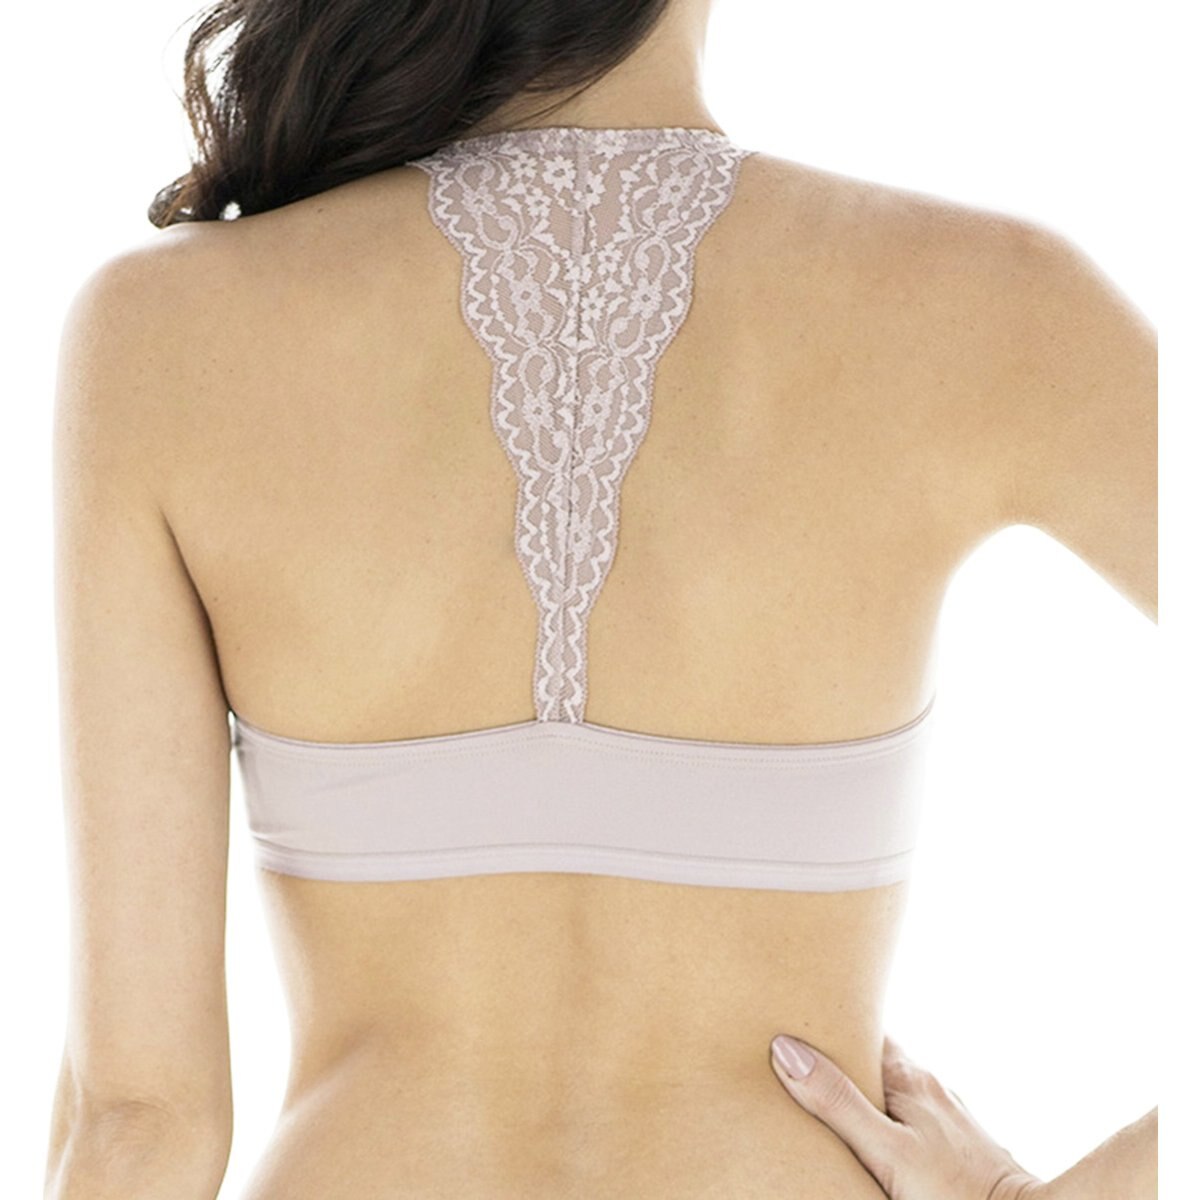 Brasier Lace Nudes Clasic Tops & Bottoms